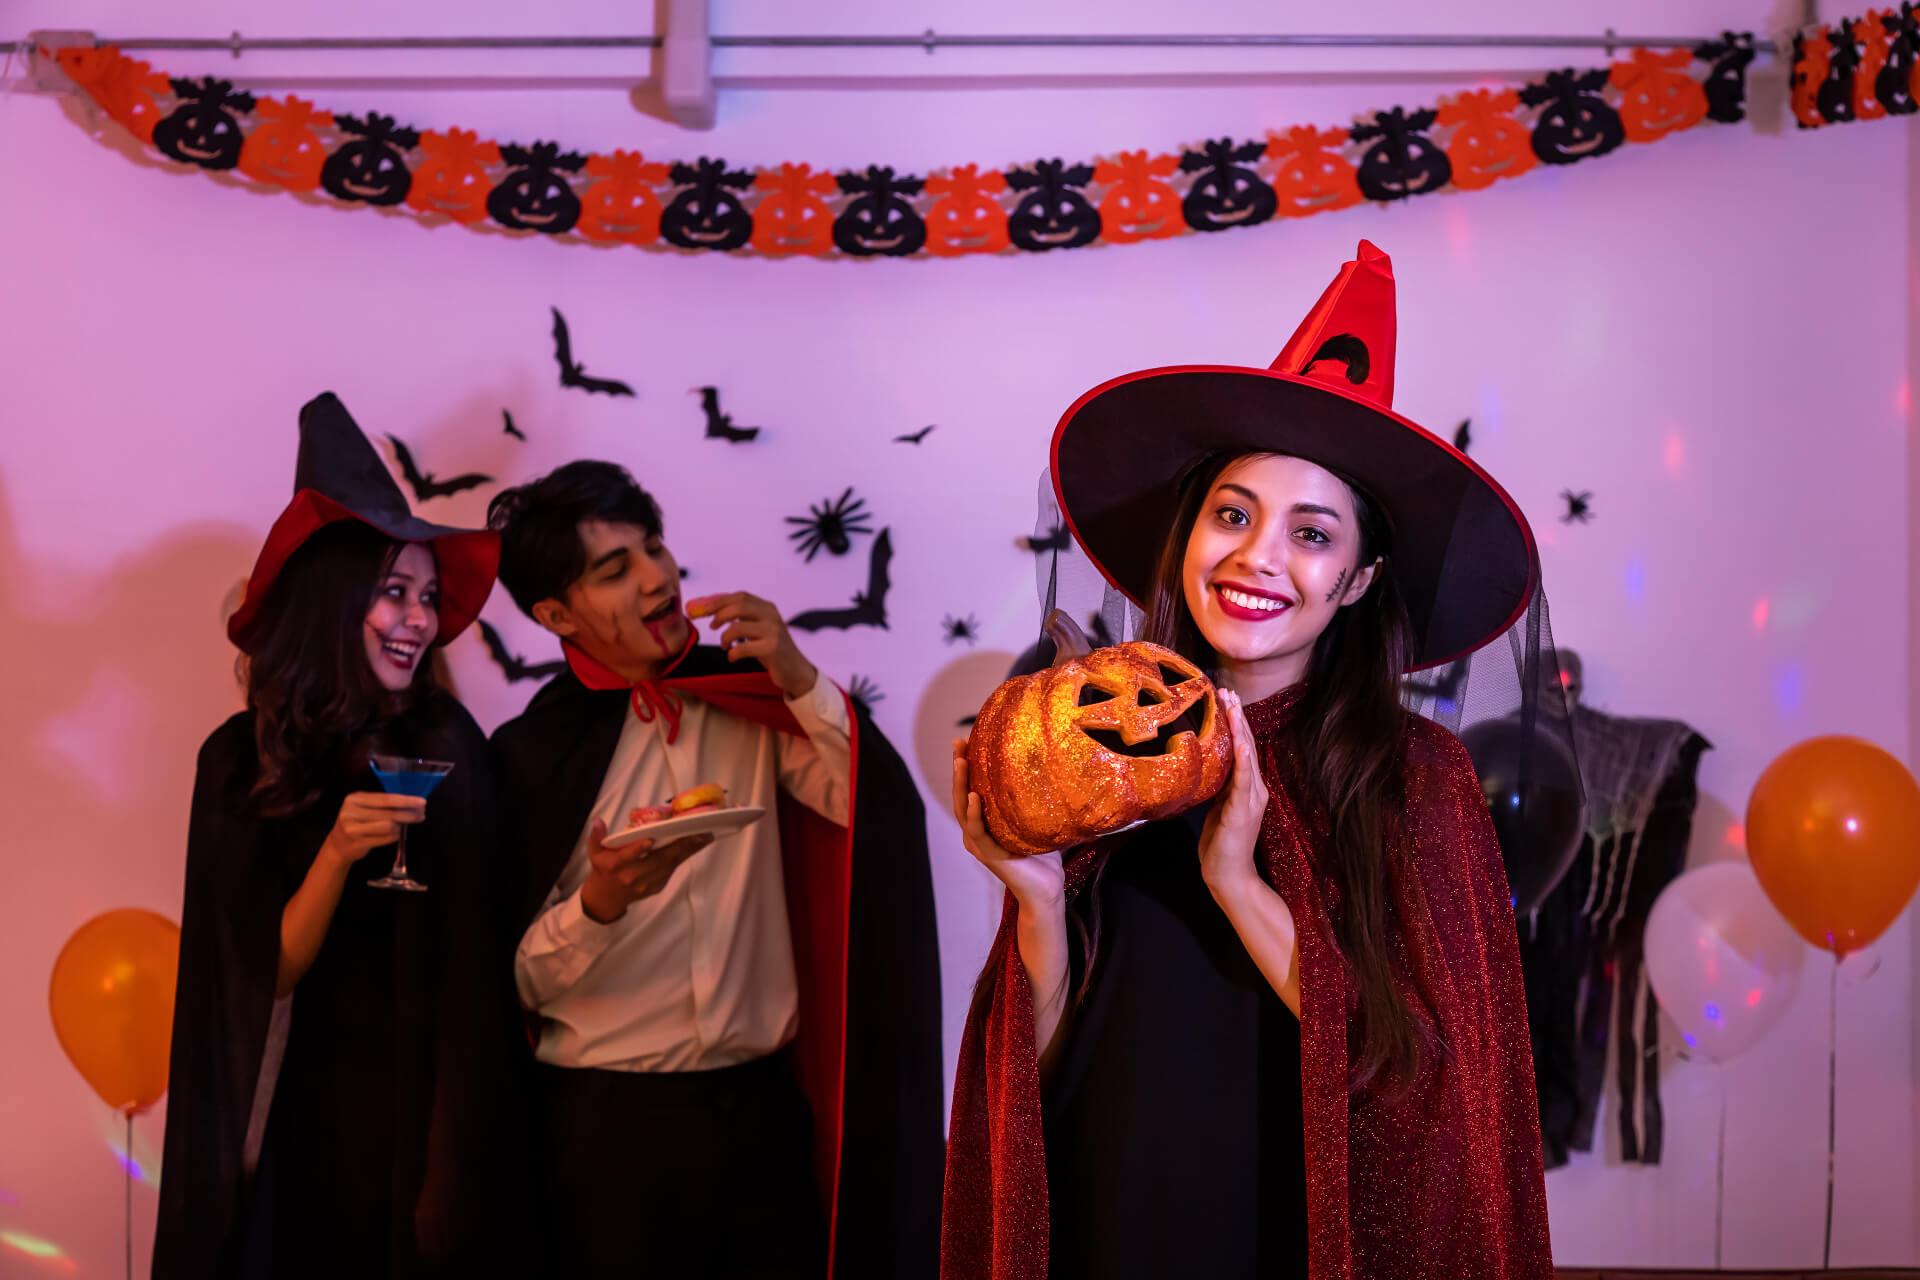 Proper preparation is the key! Get tips on selecting your Halloween costume and find out how to perfect it.